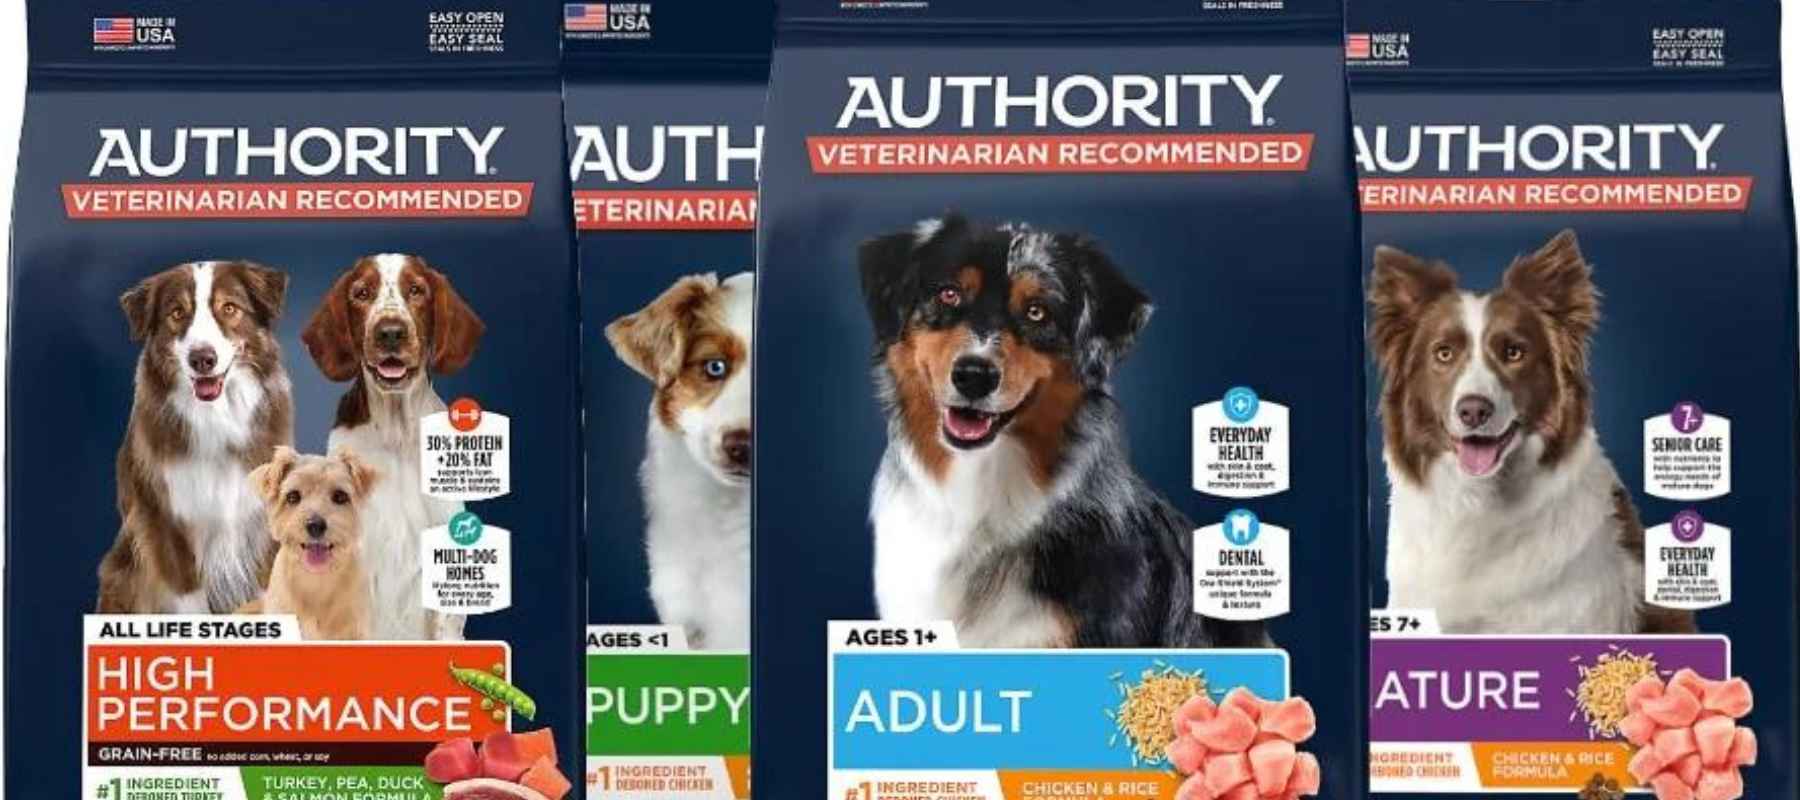 Is Authority a Good Dog Food?